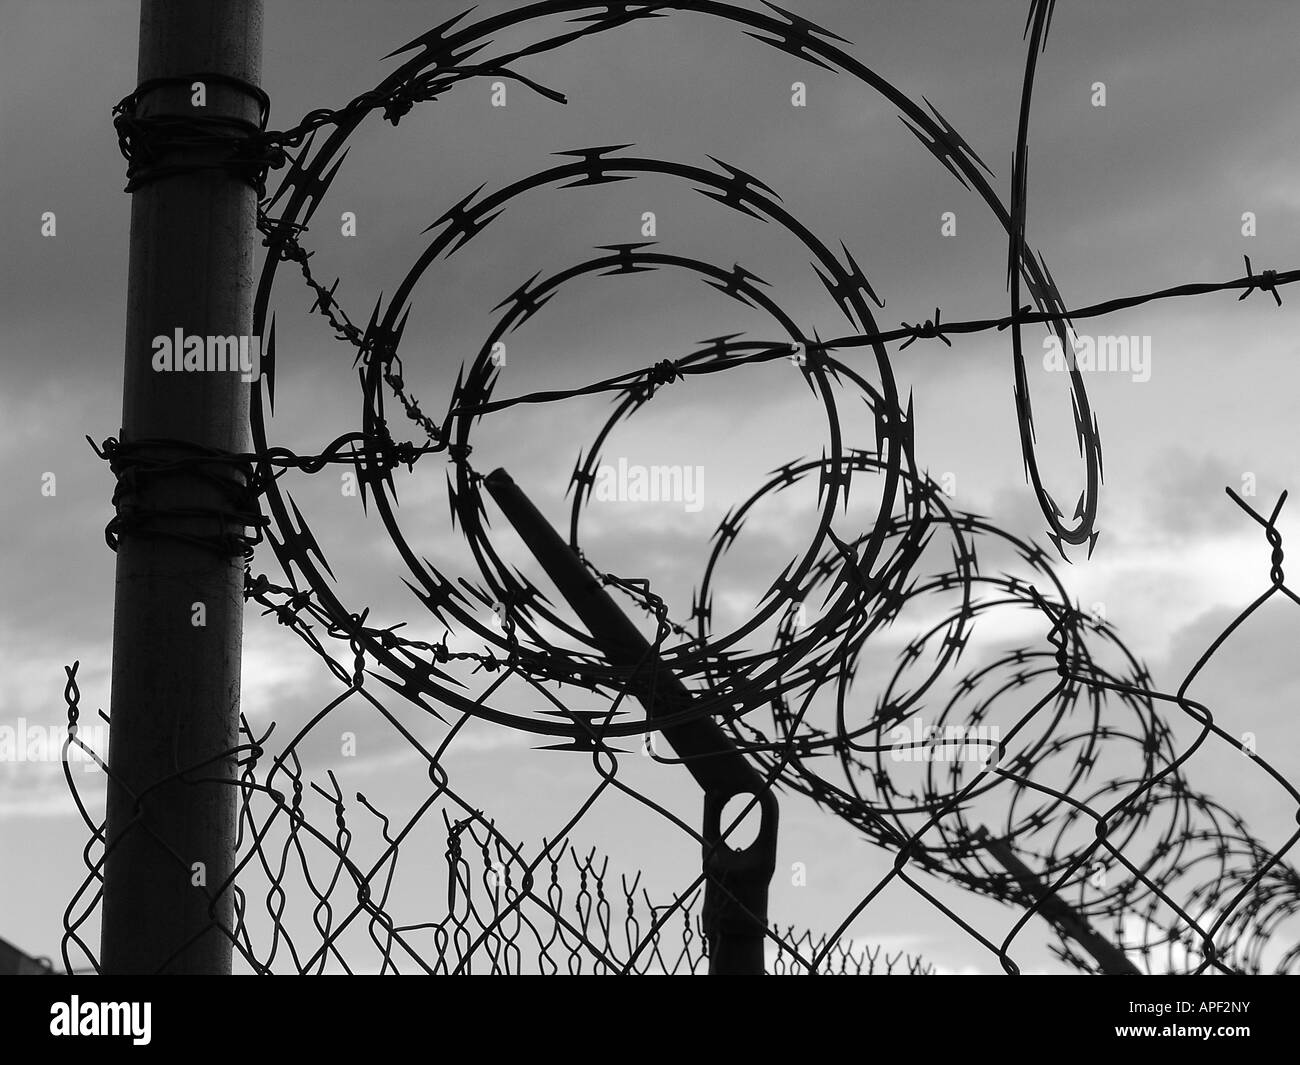 Concertina wire and fence Stock Photo